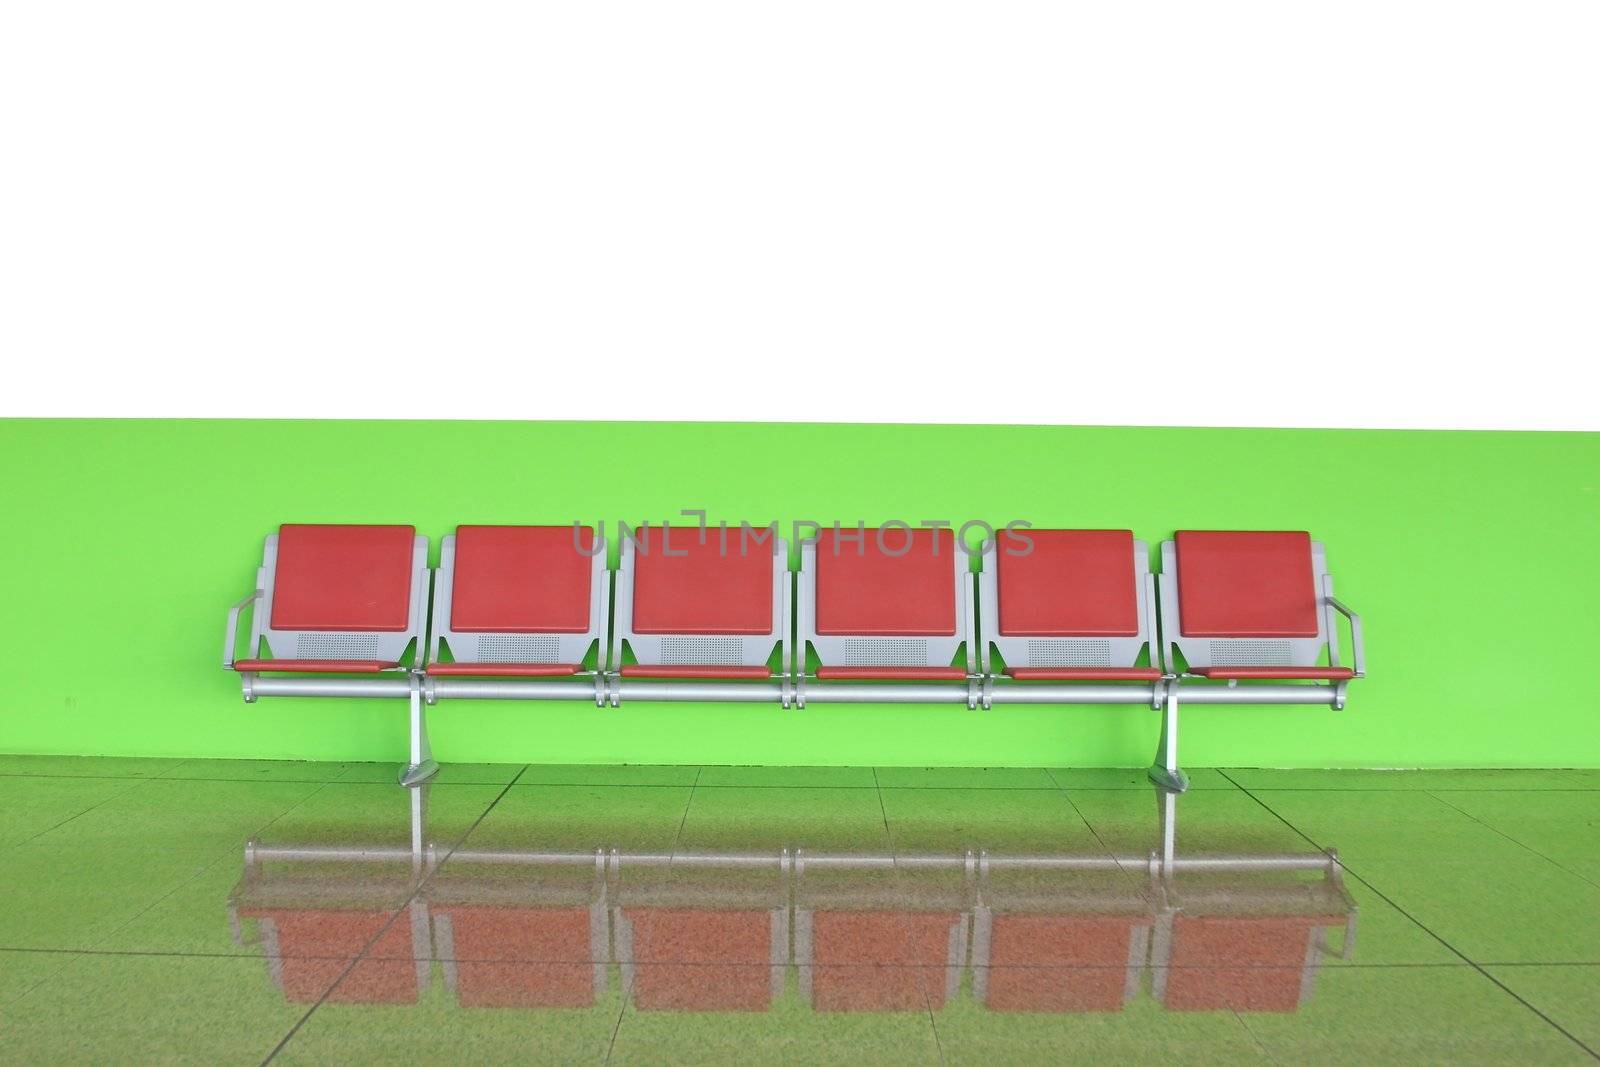 Benches  in the airport waiting for the passenger   